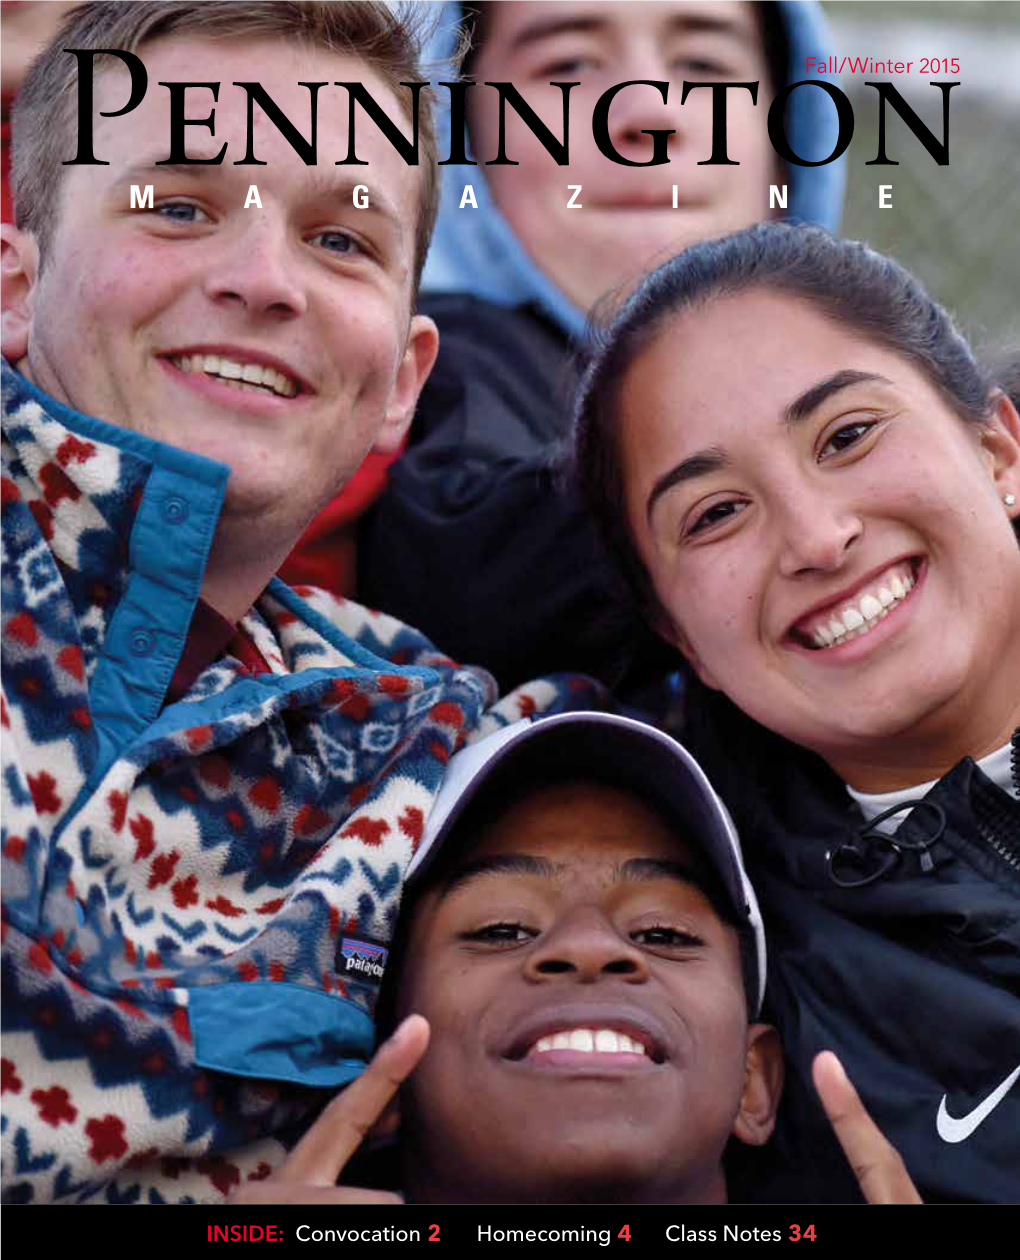 Fall/Winter 2015 INSIDE: Convocation 2 Homecoming 4 Class Notes 34